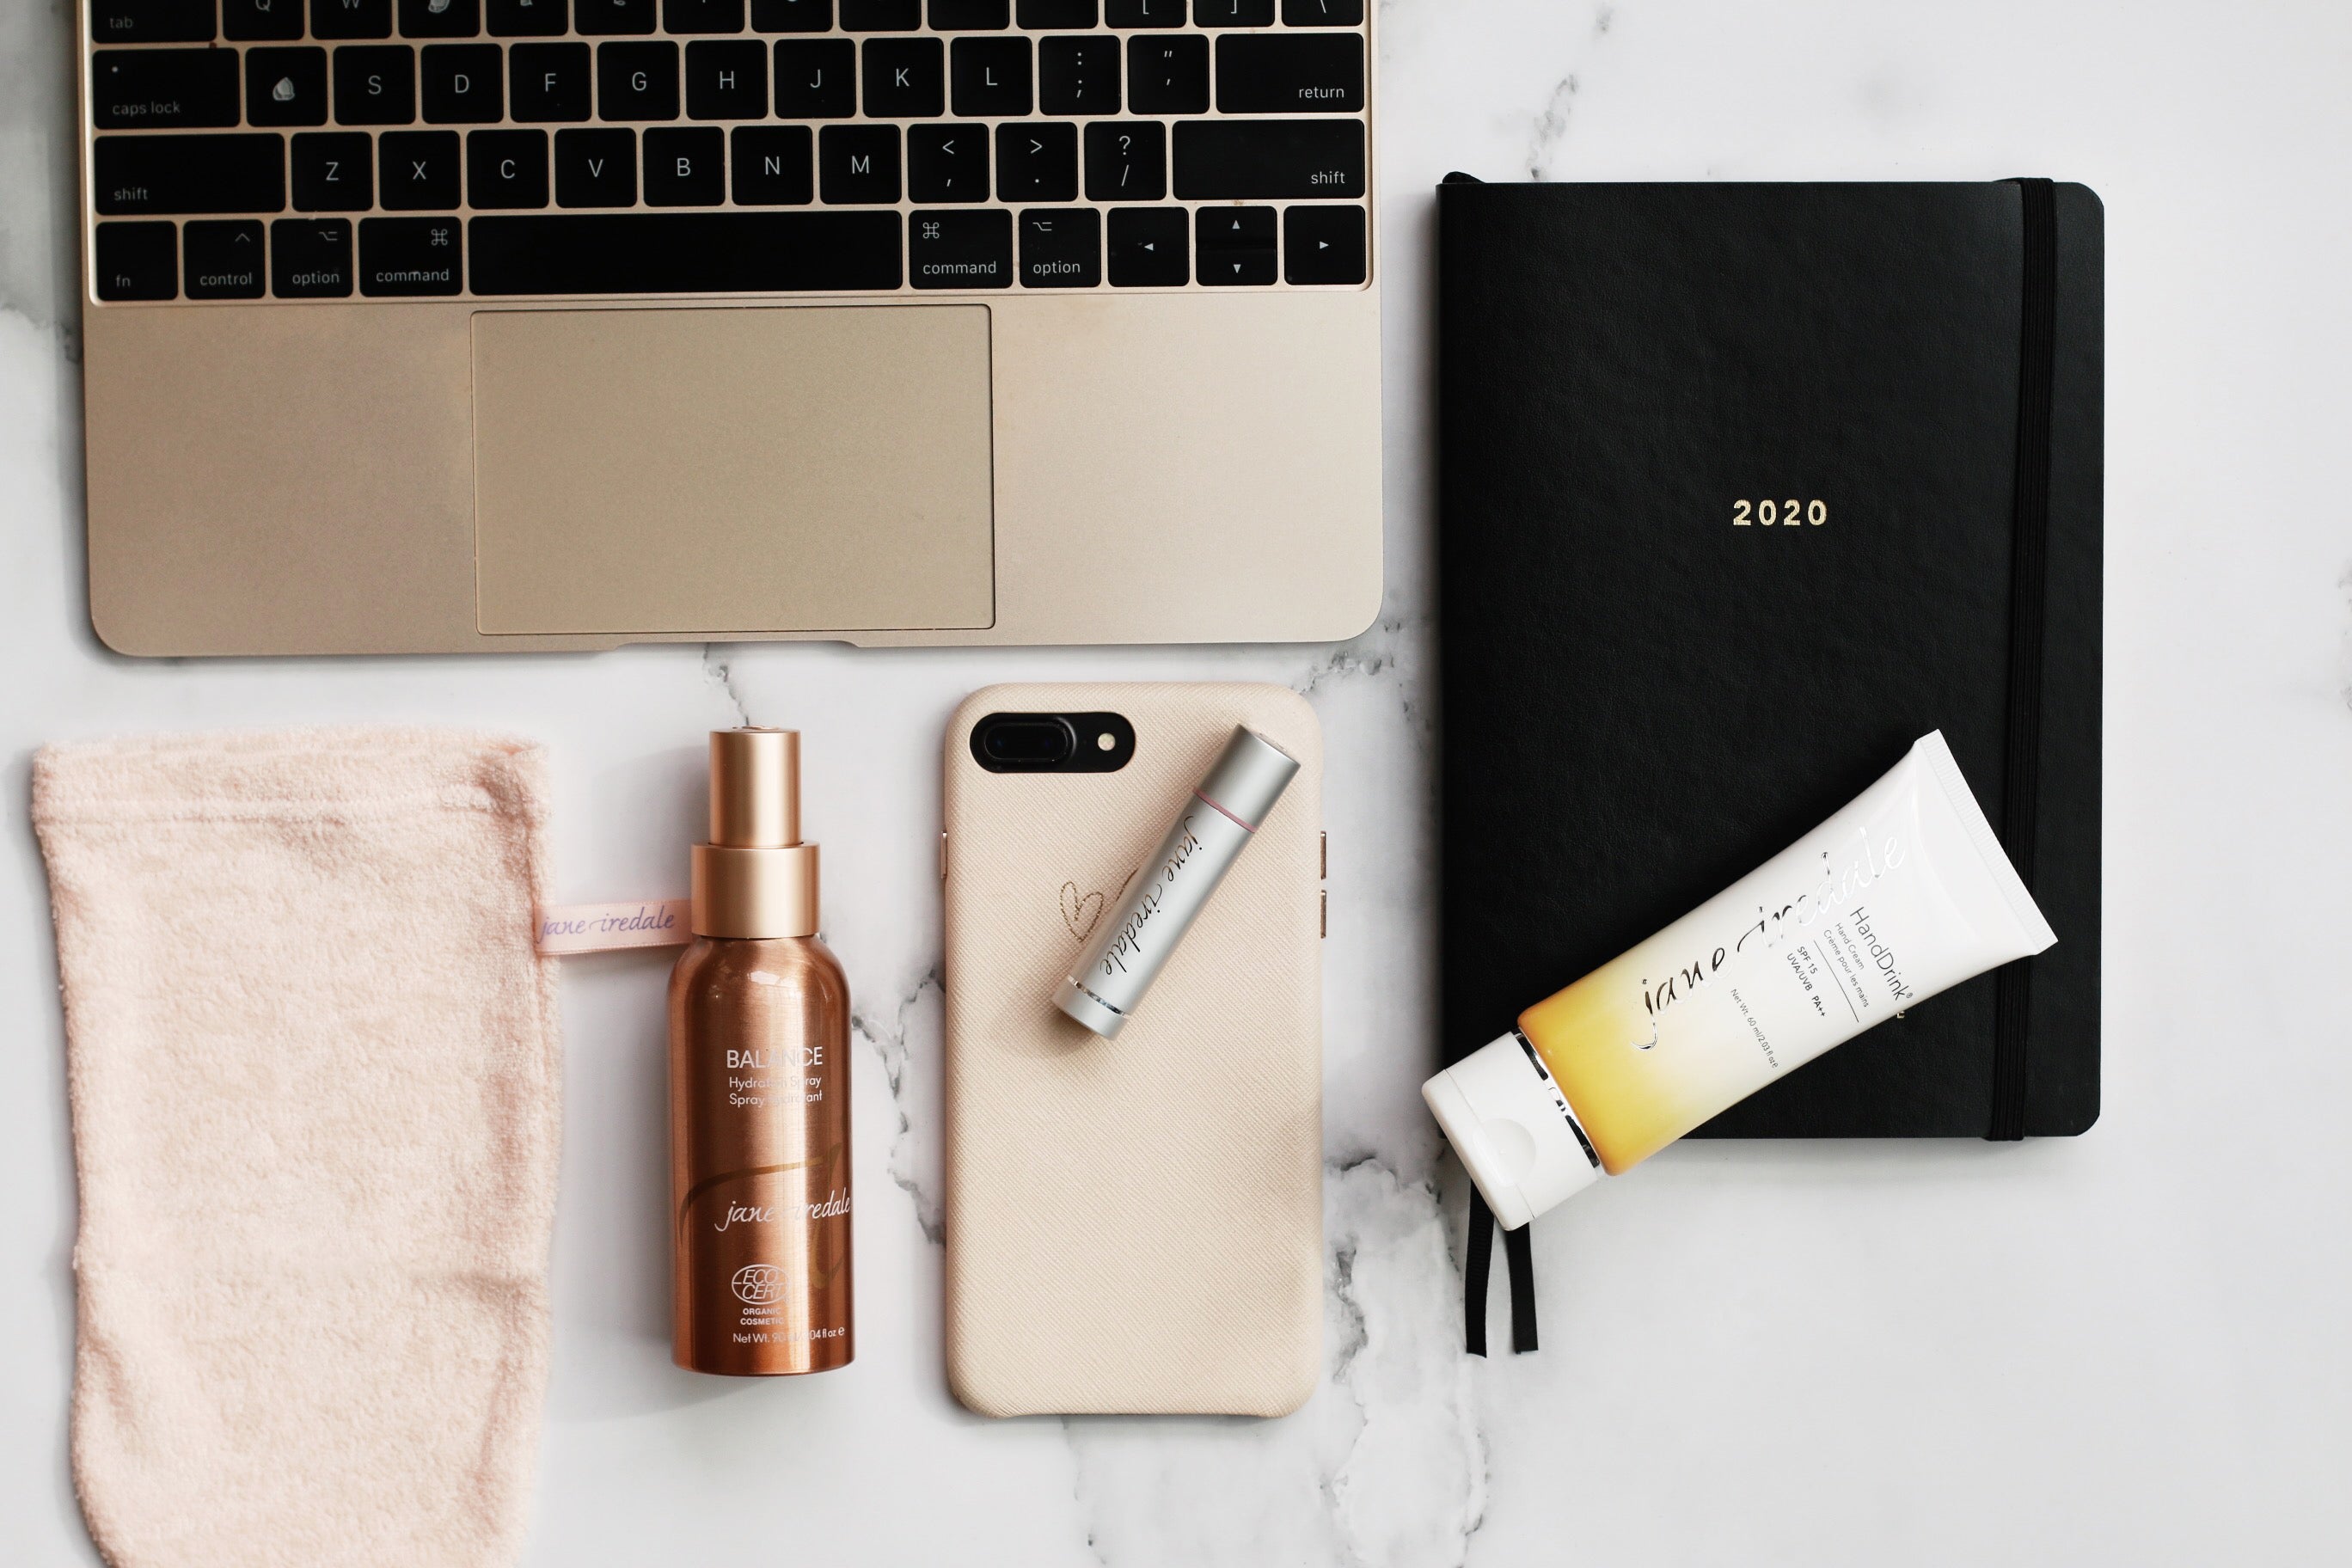 working from home beauty essentials include a magic mitt, lipdrink lip balm, hydration spray and HandDrink Hand Cream